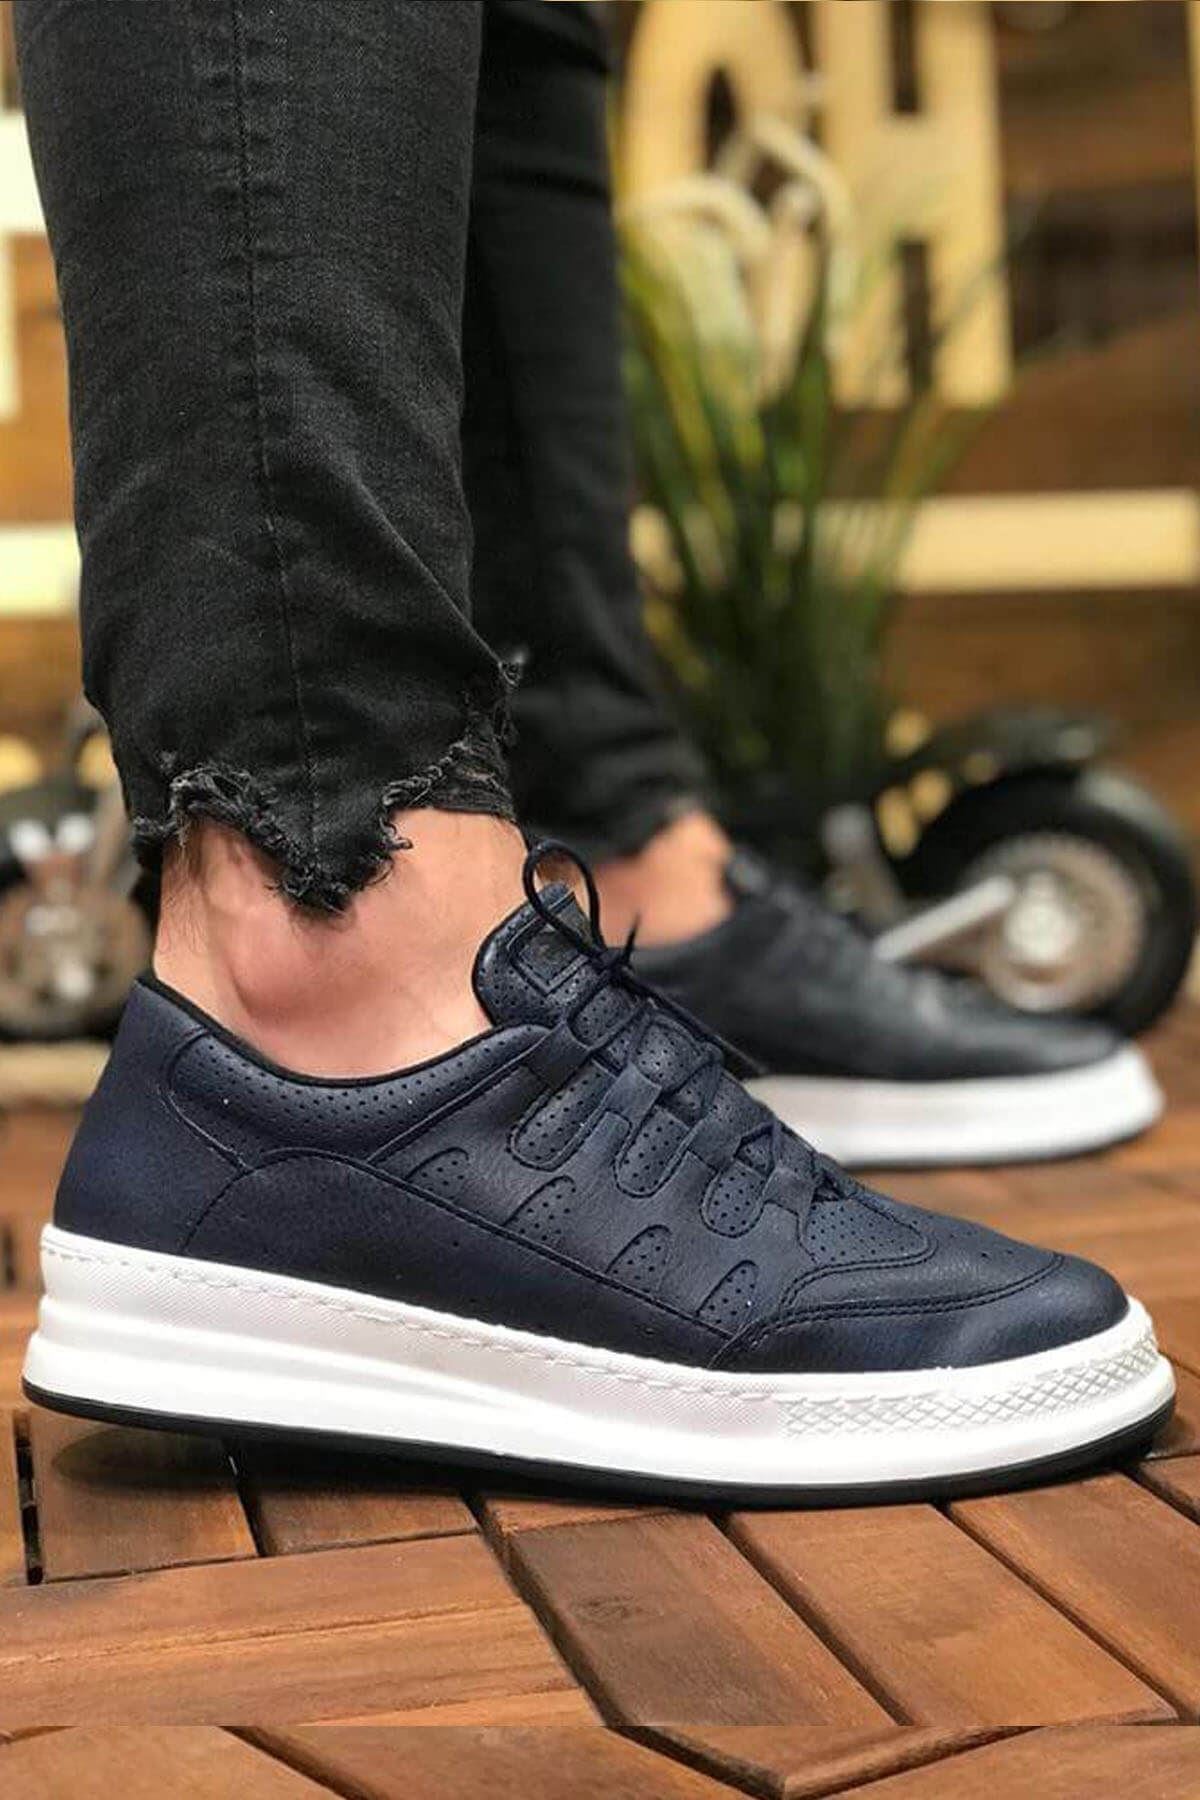 Sneakers Shoes For Men